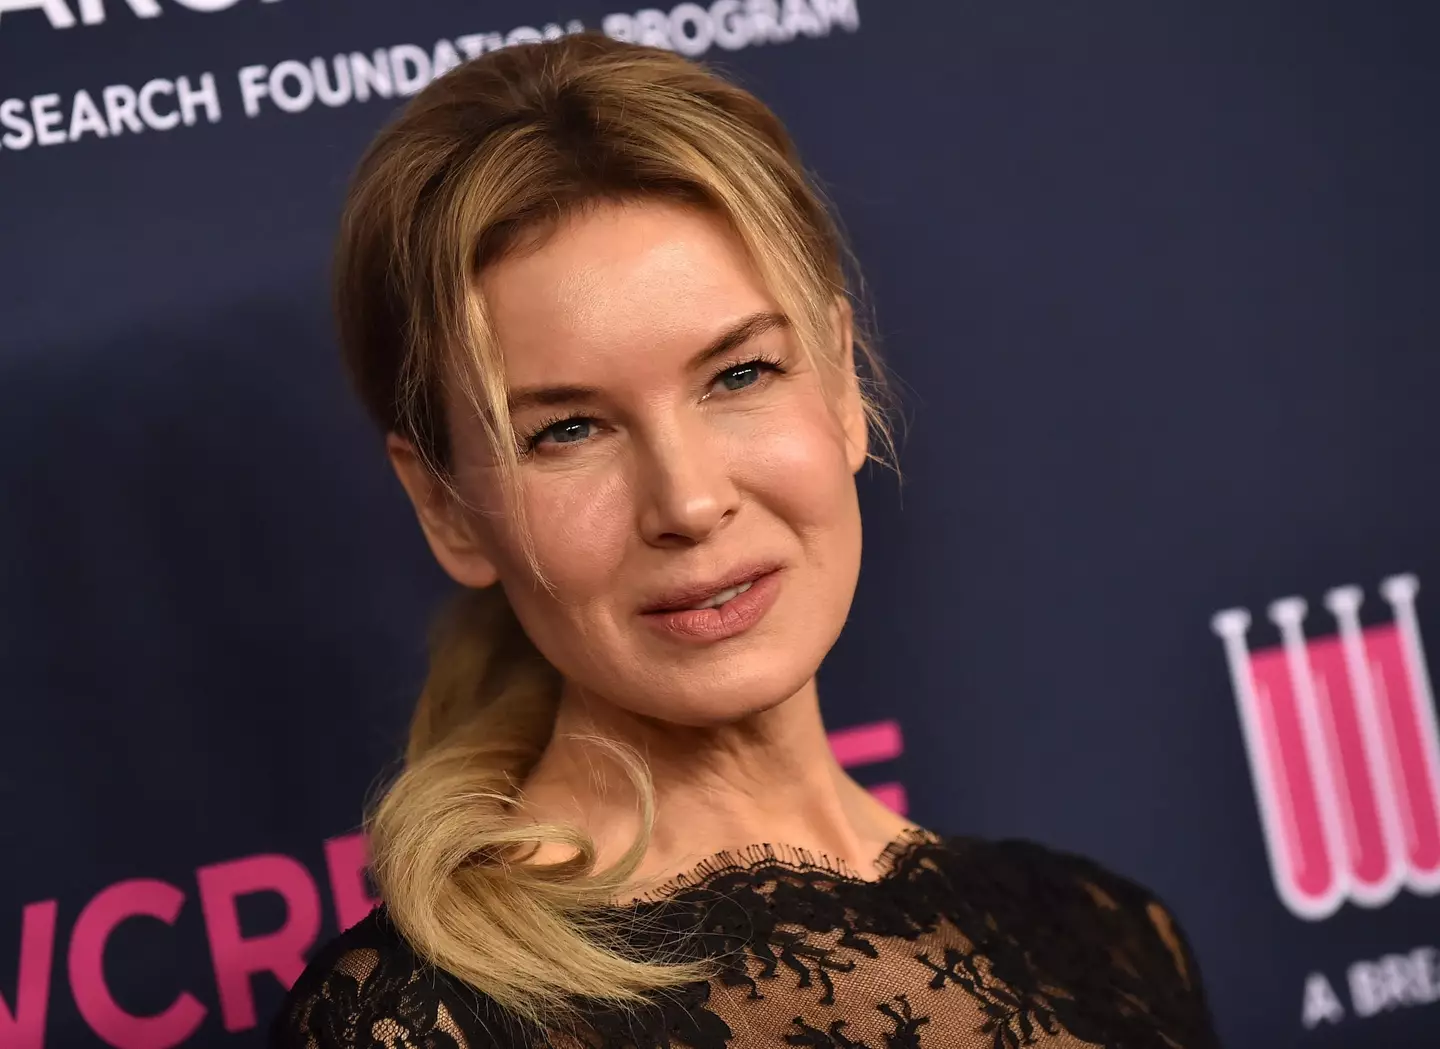 Renee Zellweger has opened up about what a producer said to get her to remove her clothes on set.